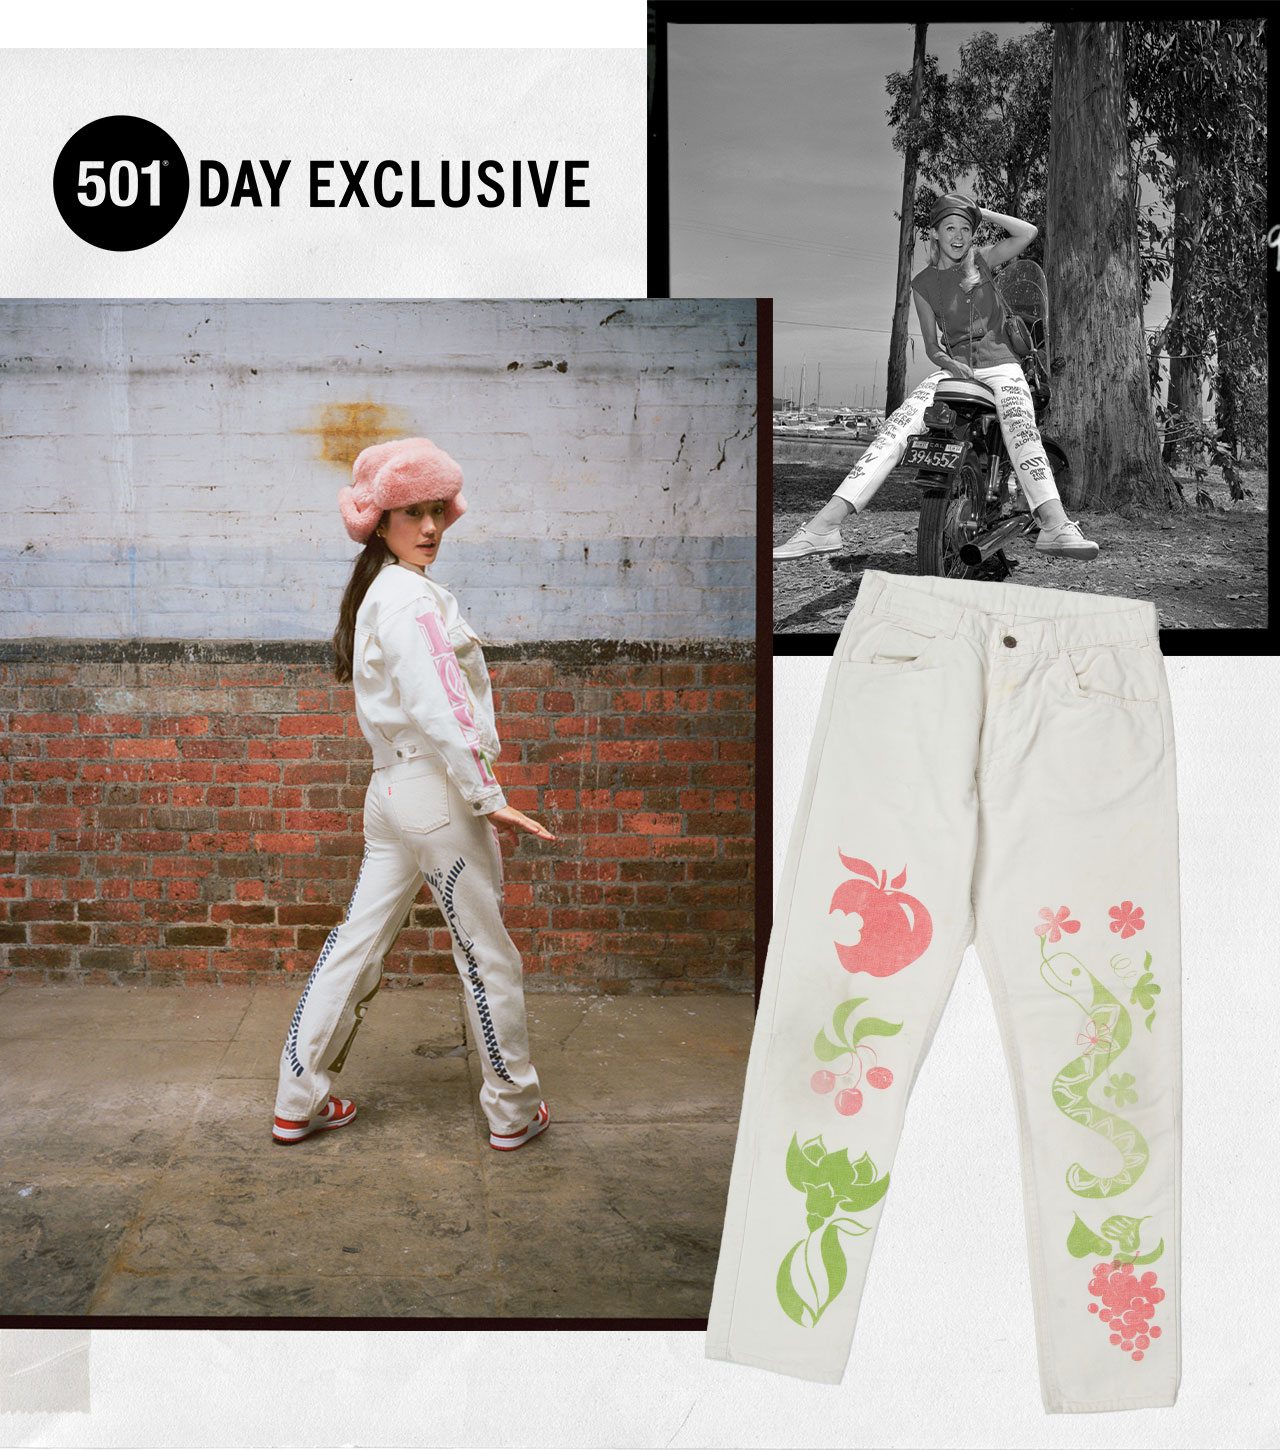 501 DAY EXCLUSIVE: CRAZY LEGS. SHOP THE COLLECTION